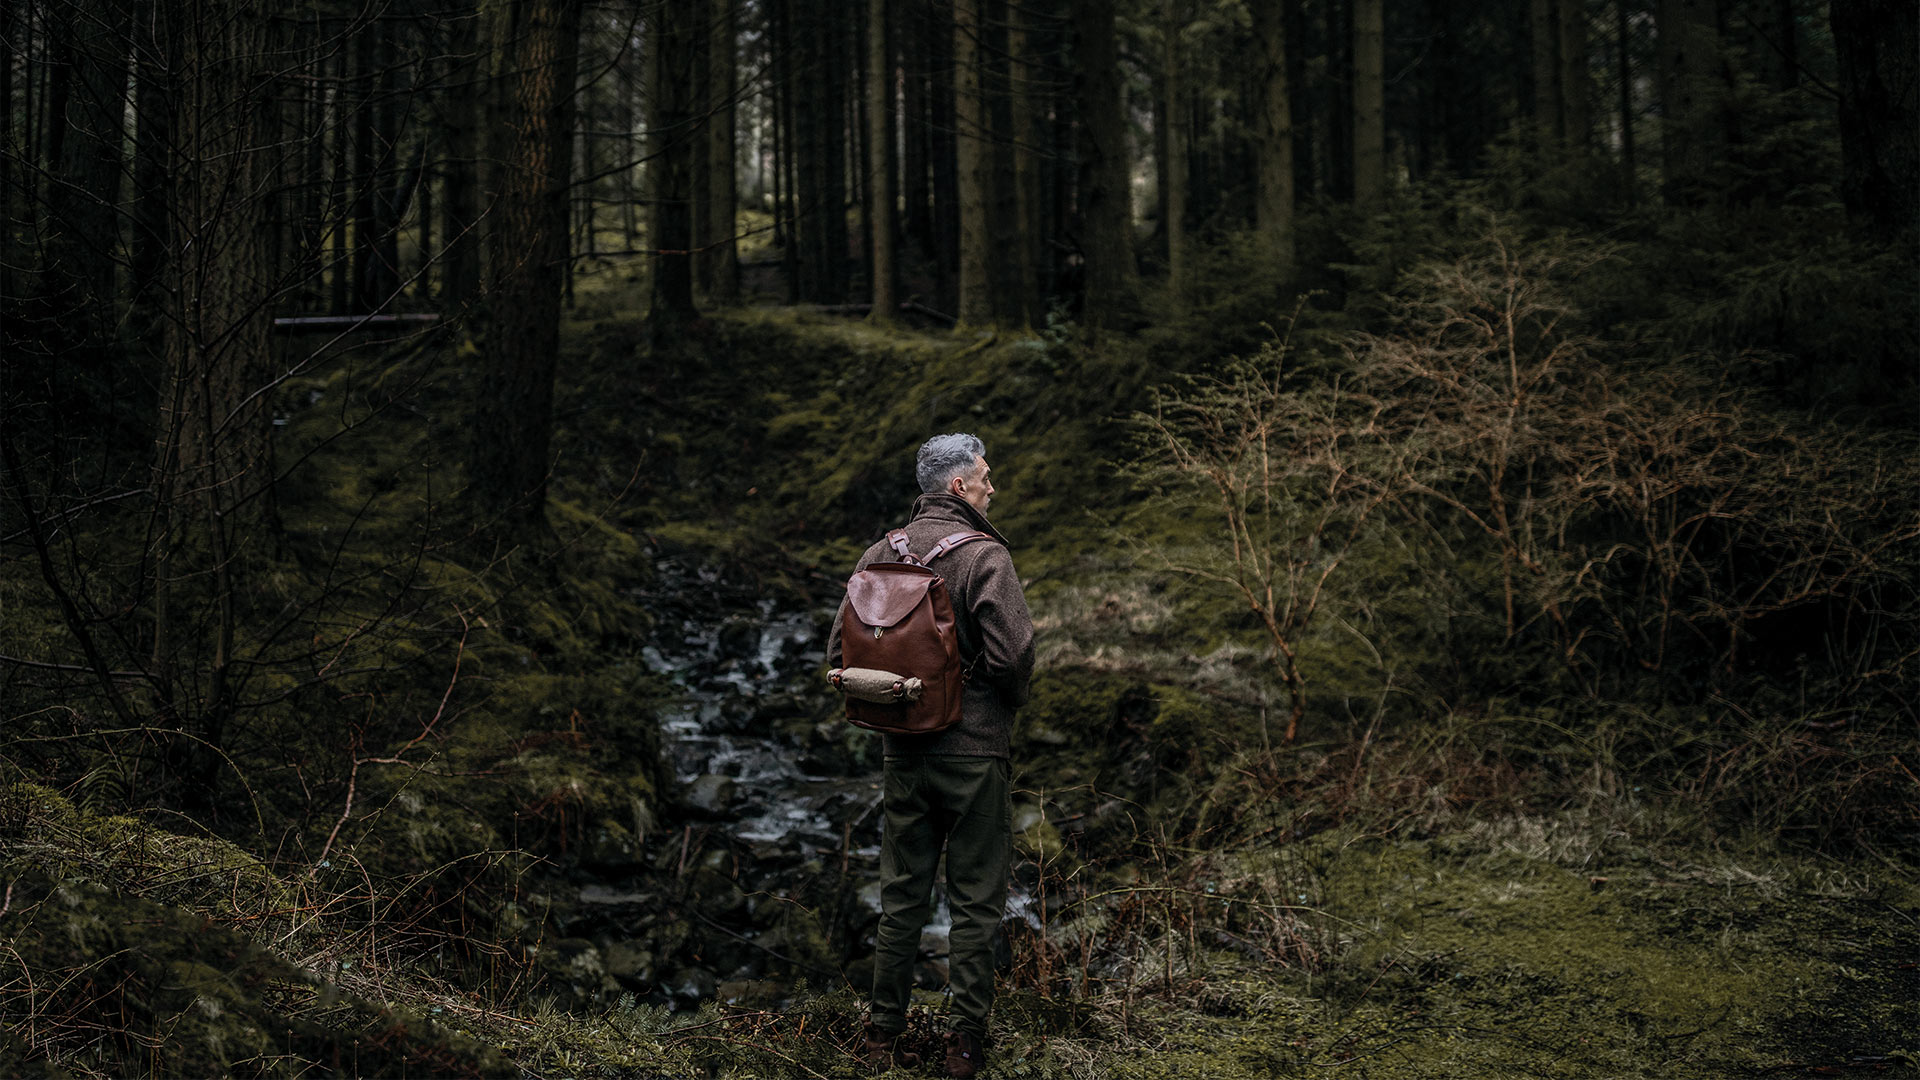 A man in the forest carrying the sable leather backpack